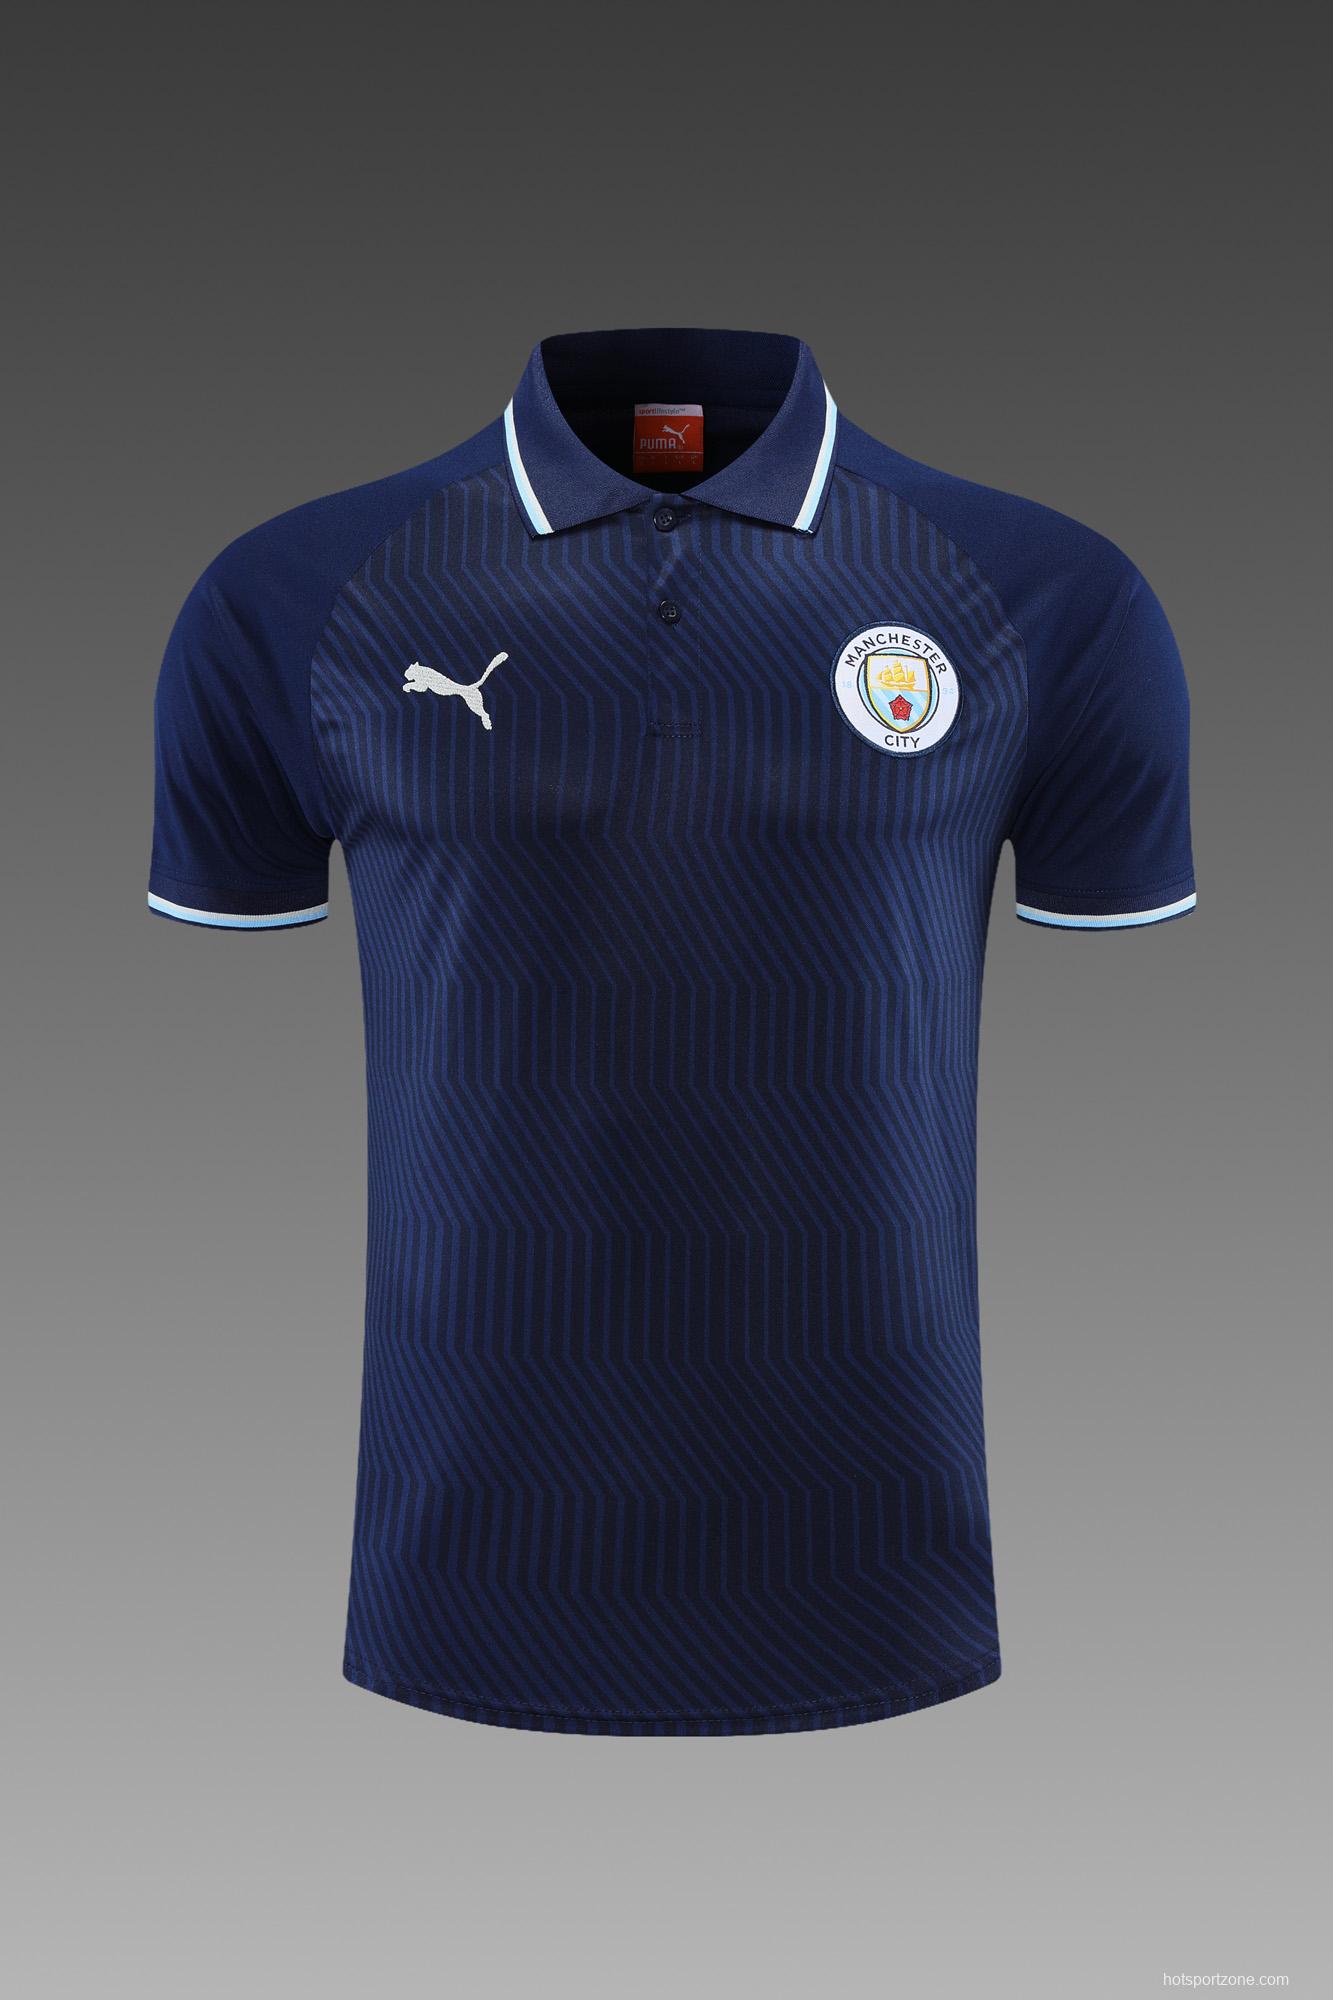 Manchester City POLO kit Dark Blue (not supported to be sold separately)